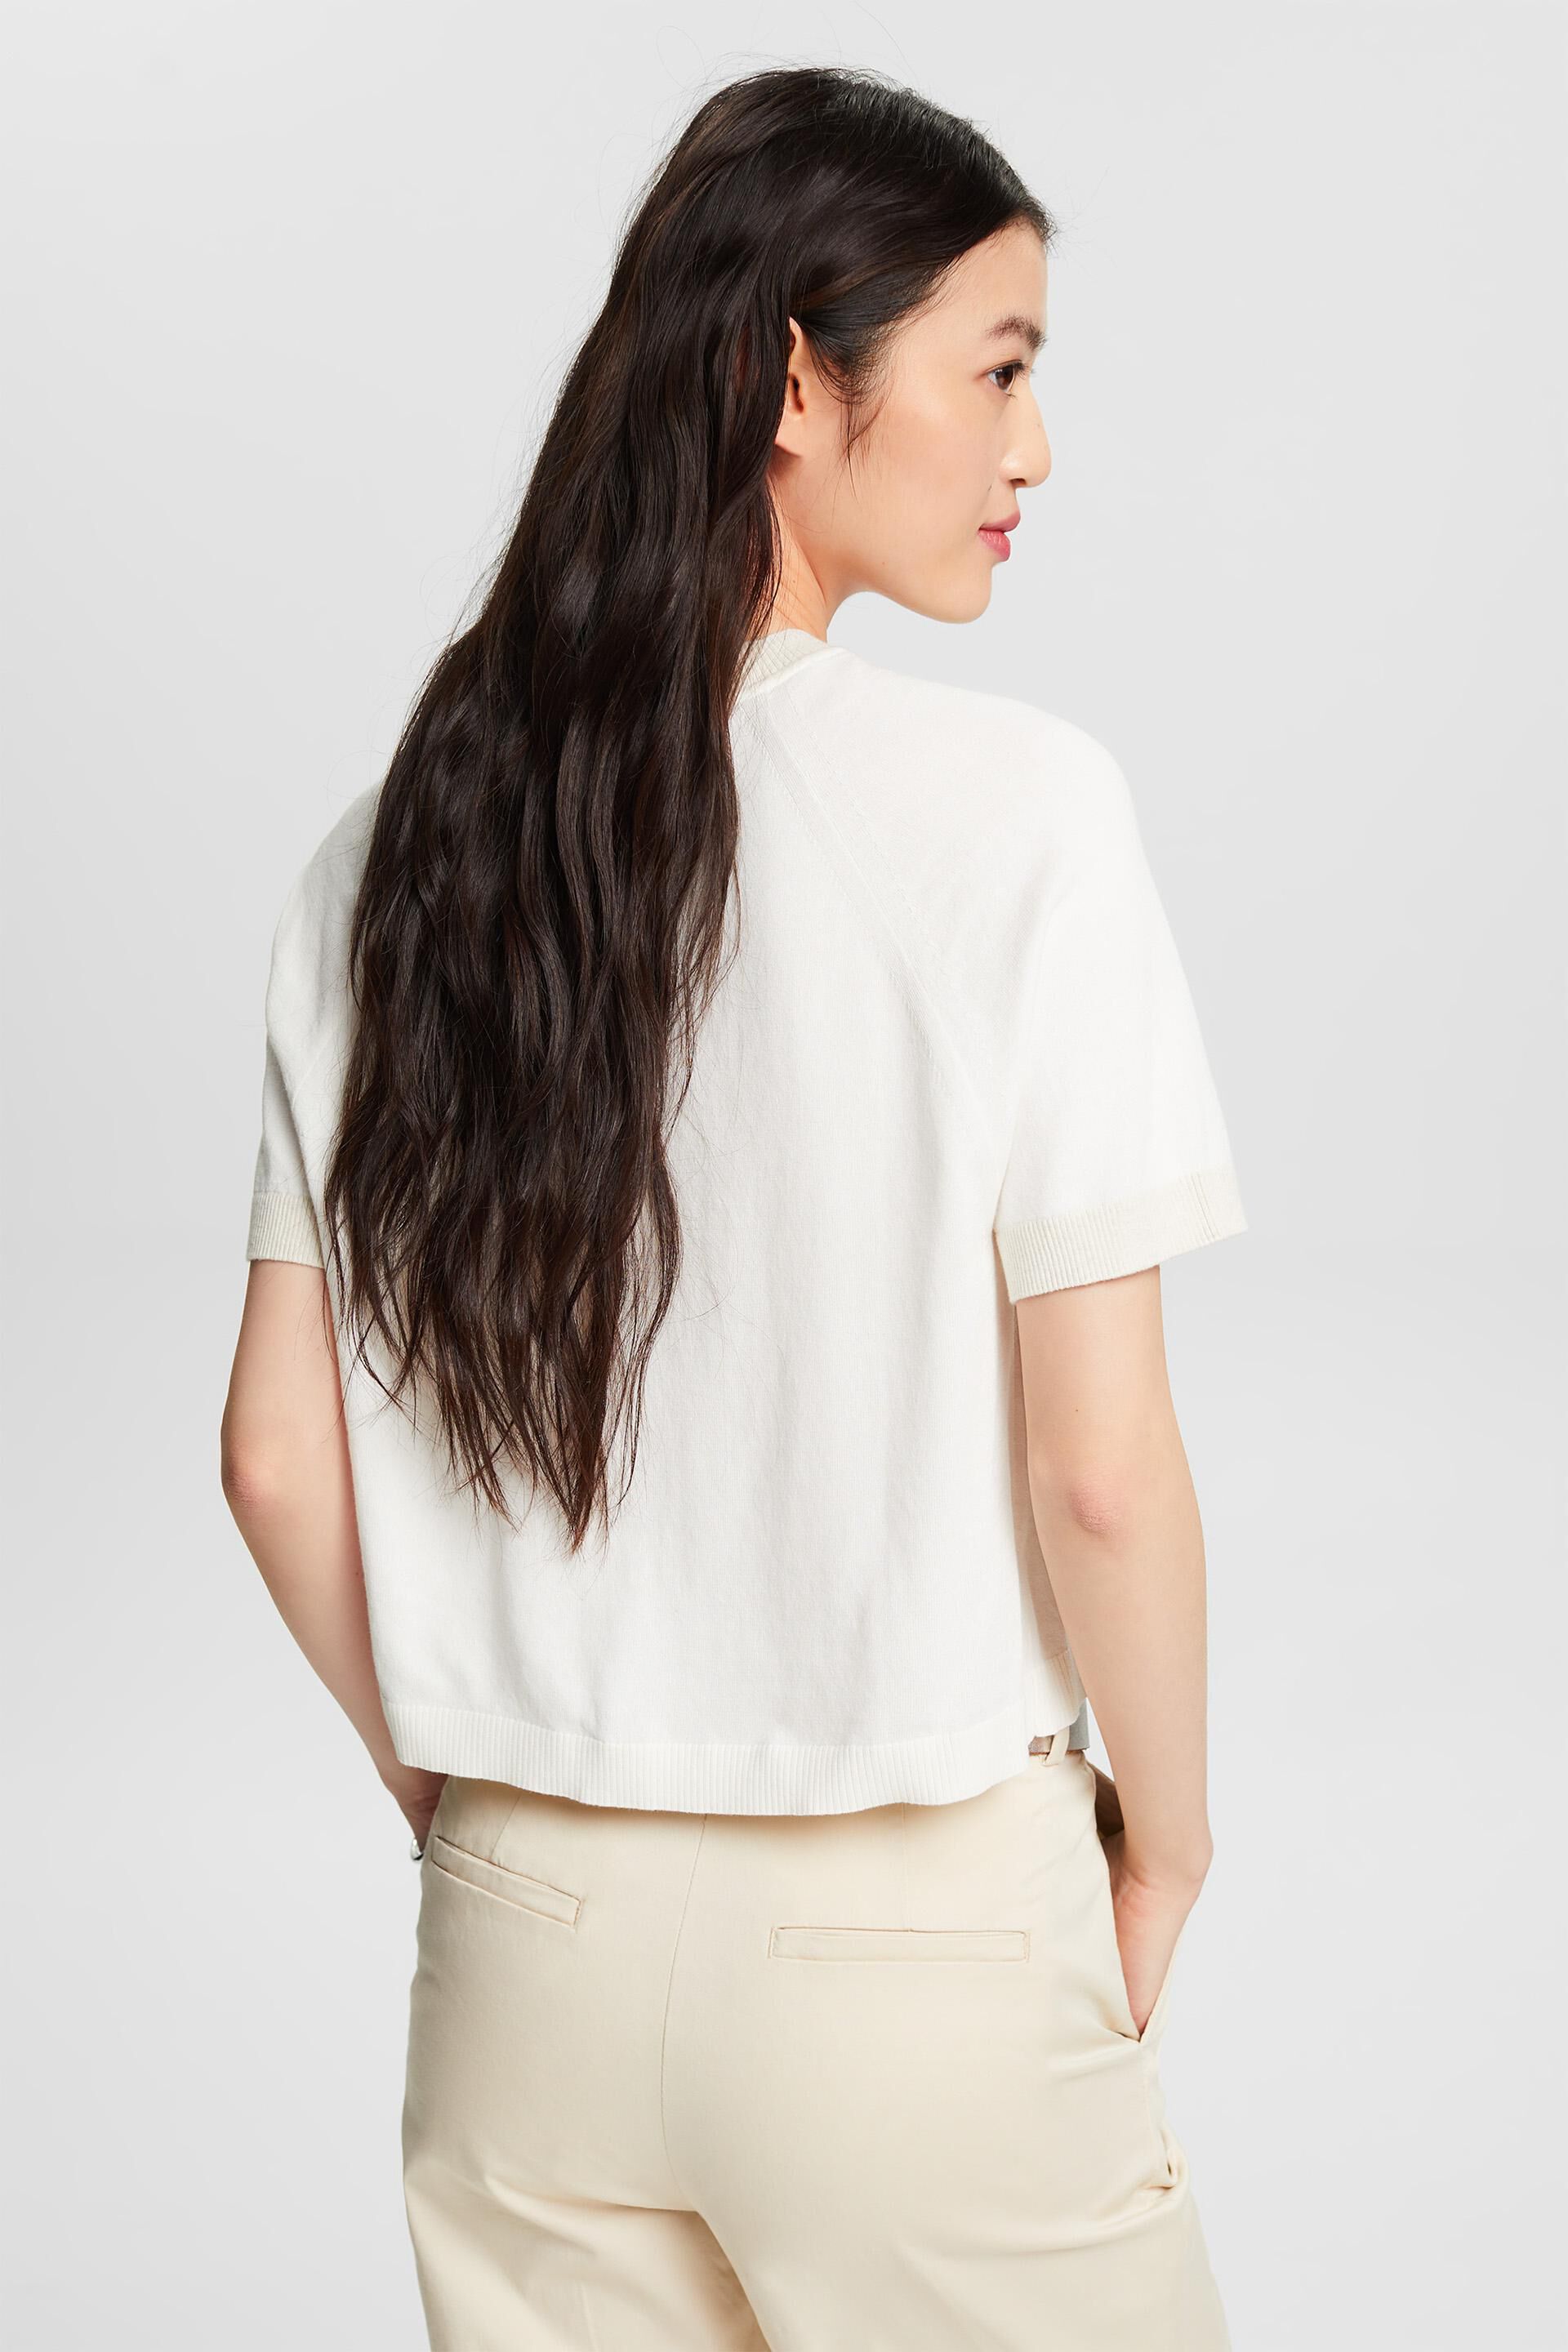 ESPRIT - Two-Tone Short-Sleeve Sweater at our online shop